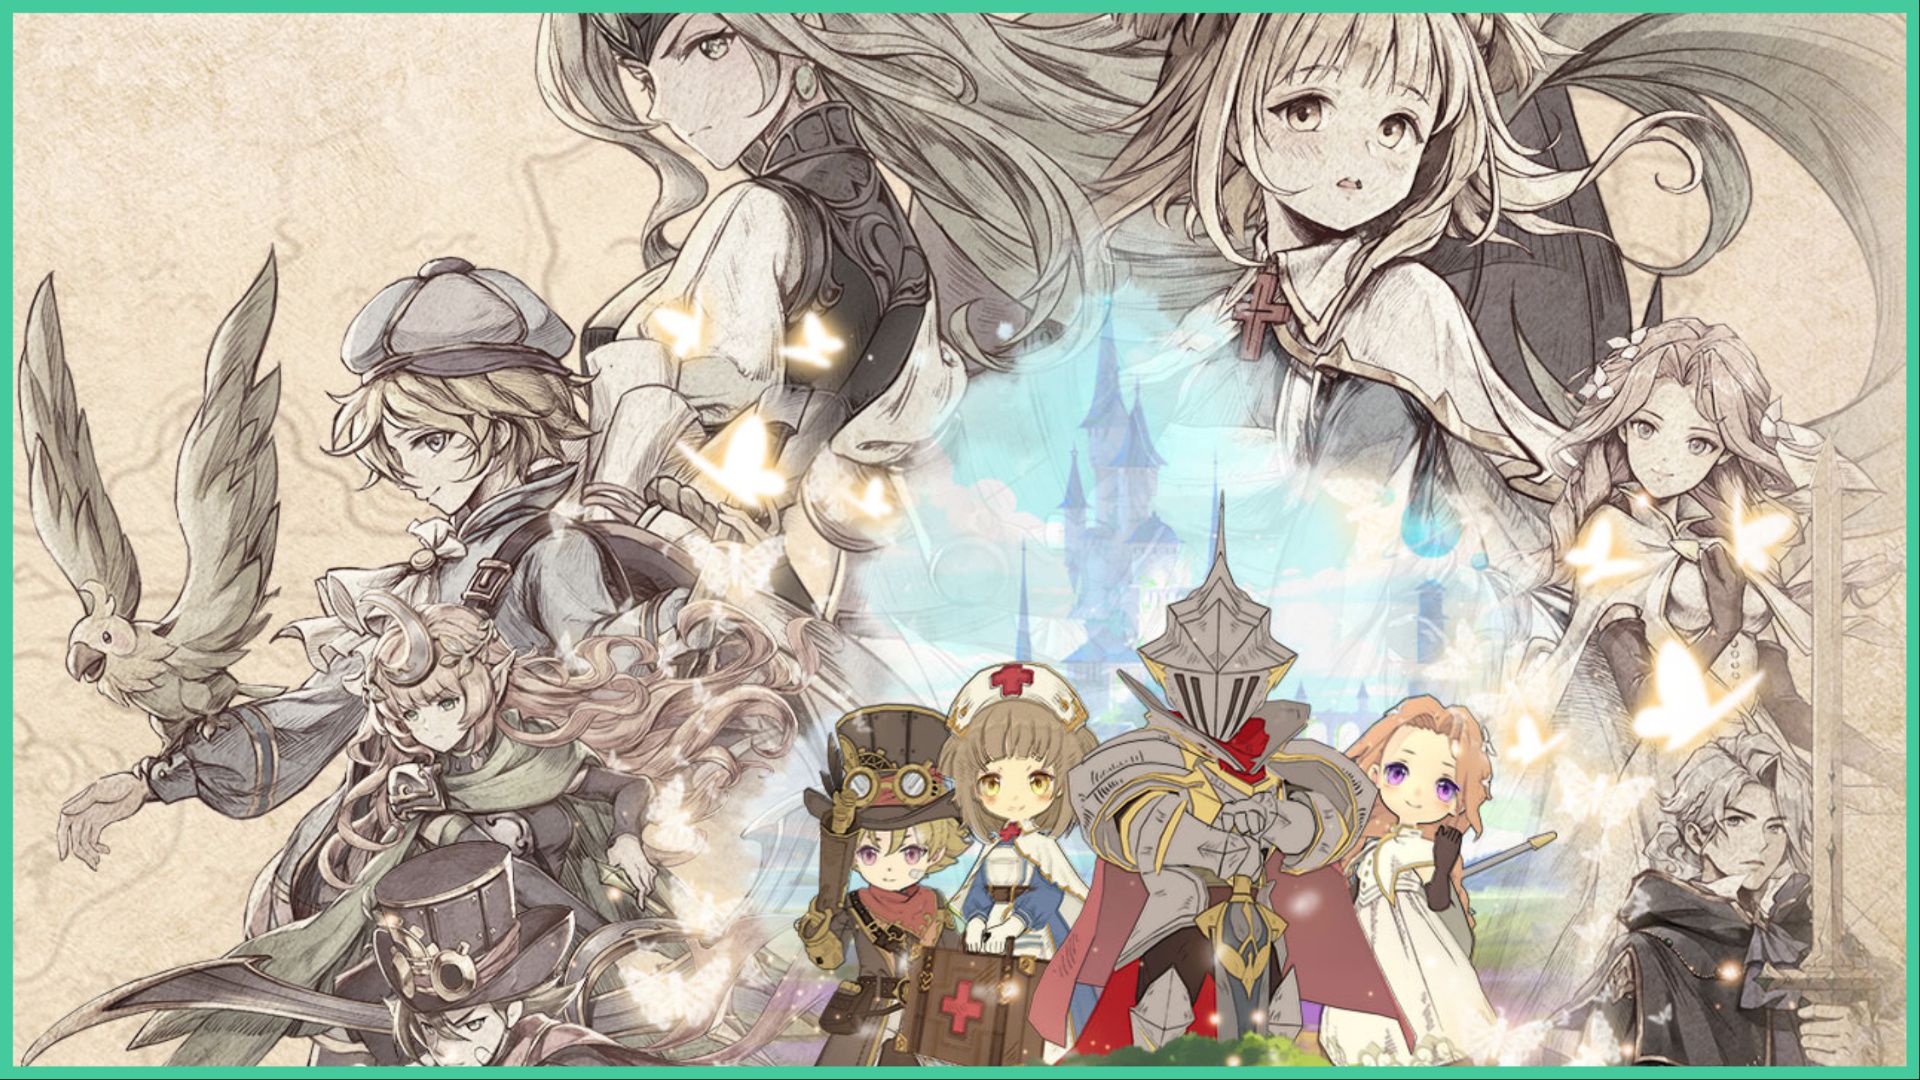 feature image for our magic chronicle tier list, the image features promo art for the game of a variety of characters, including a character to the left who has a bird on his arm, there are large character portraits framing a drawing of 4 chibi style characters from the game with a knight in the middle holding his sword into the ground with a tall castle with towers in the distance, there are glowing butterflies around the art